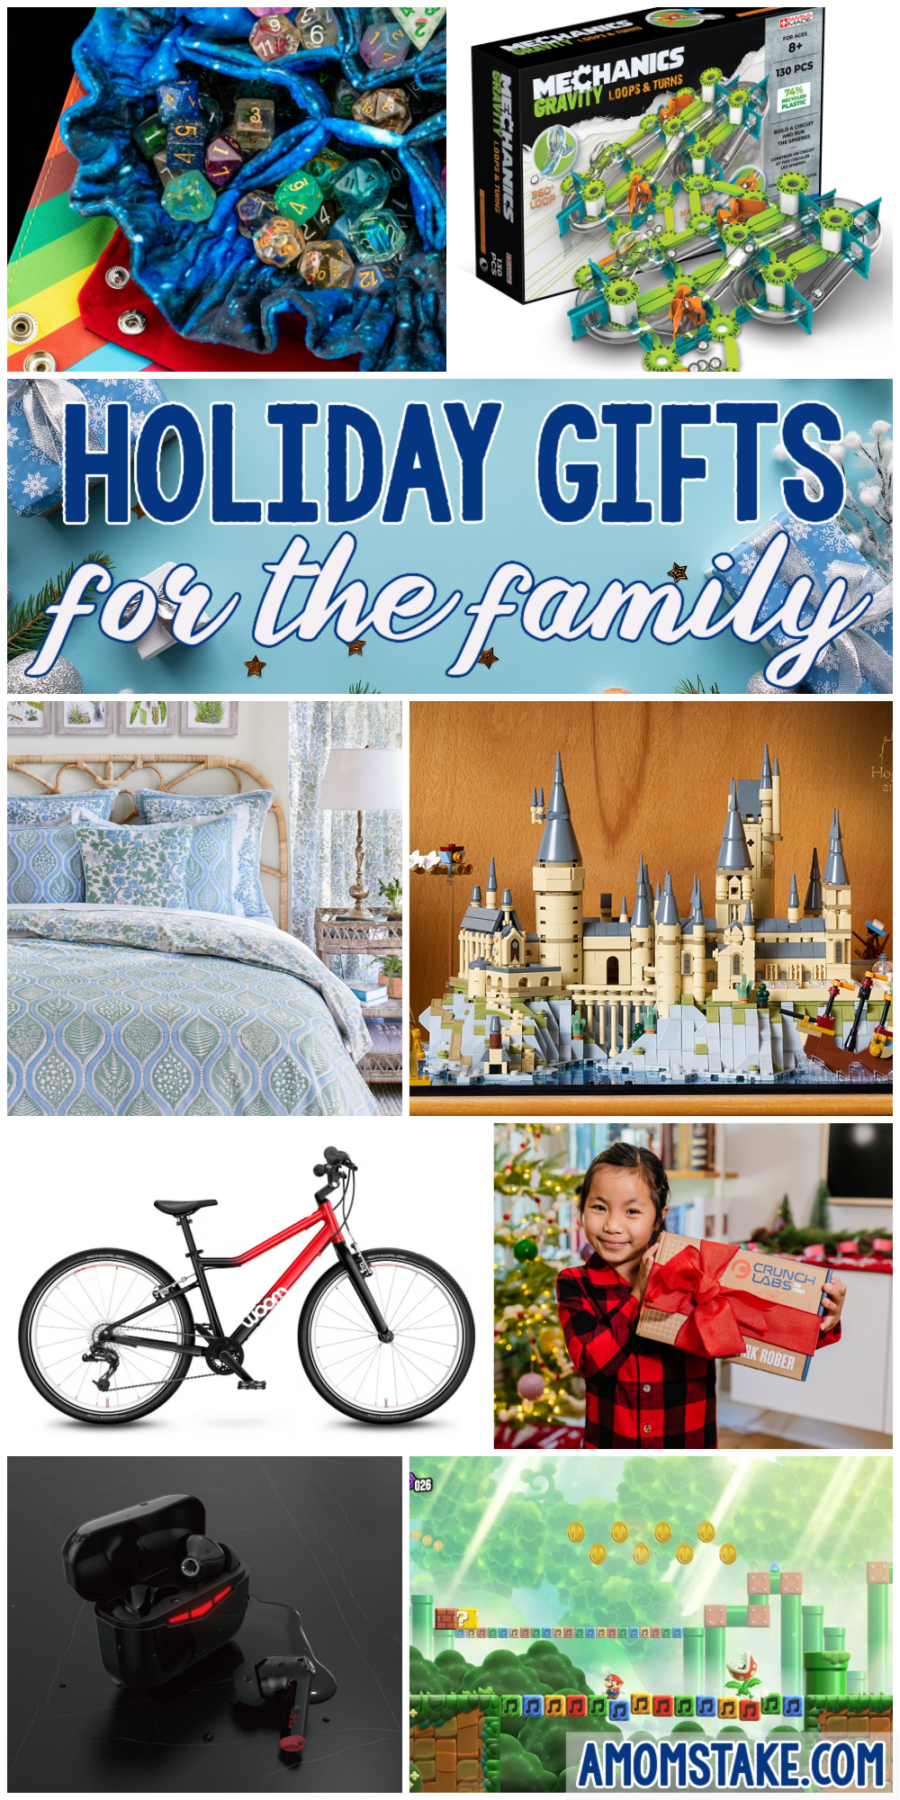 Holiday Gift Ideas for the whole family including gifts for kids, gifts for teens, and gifts for adults with presents they will love all year long.